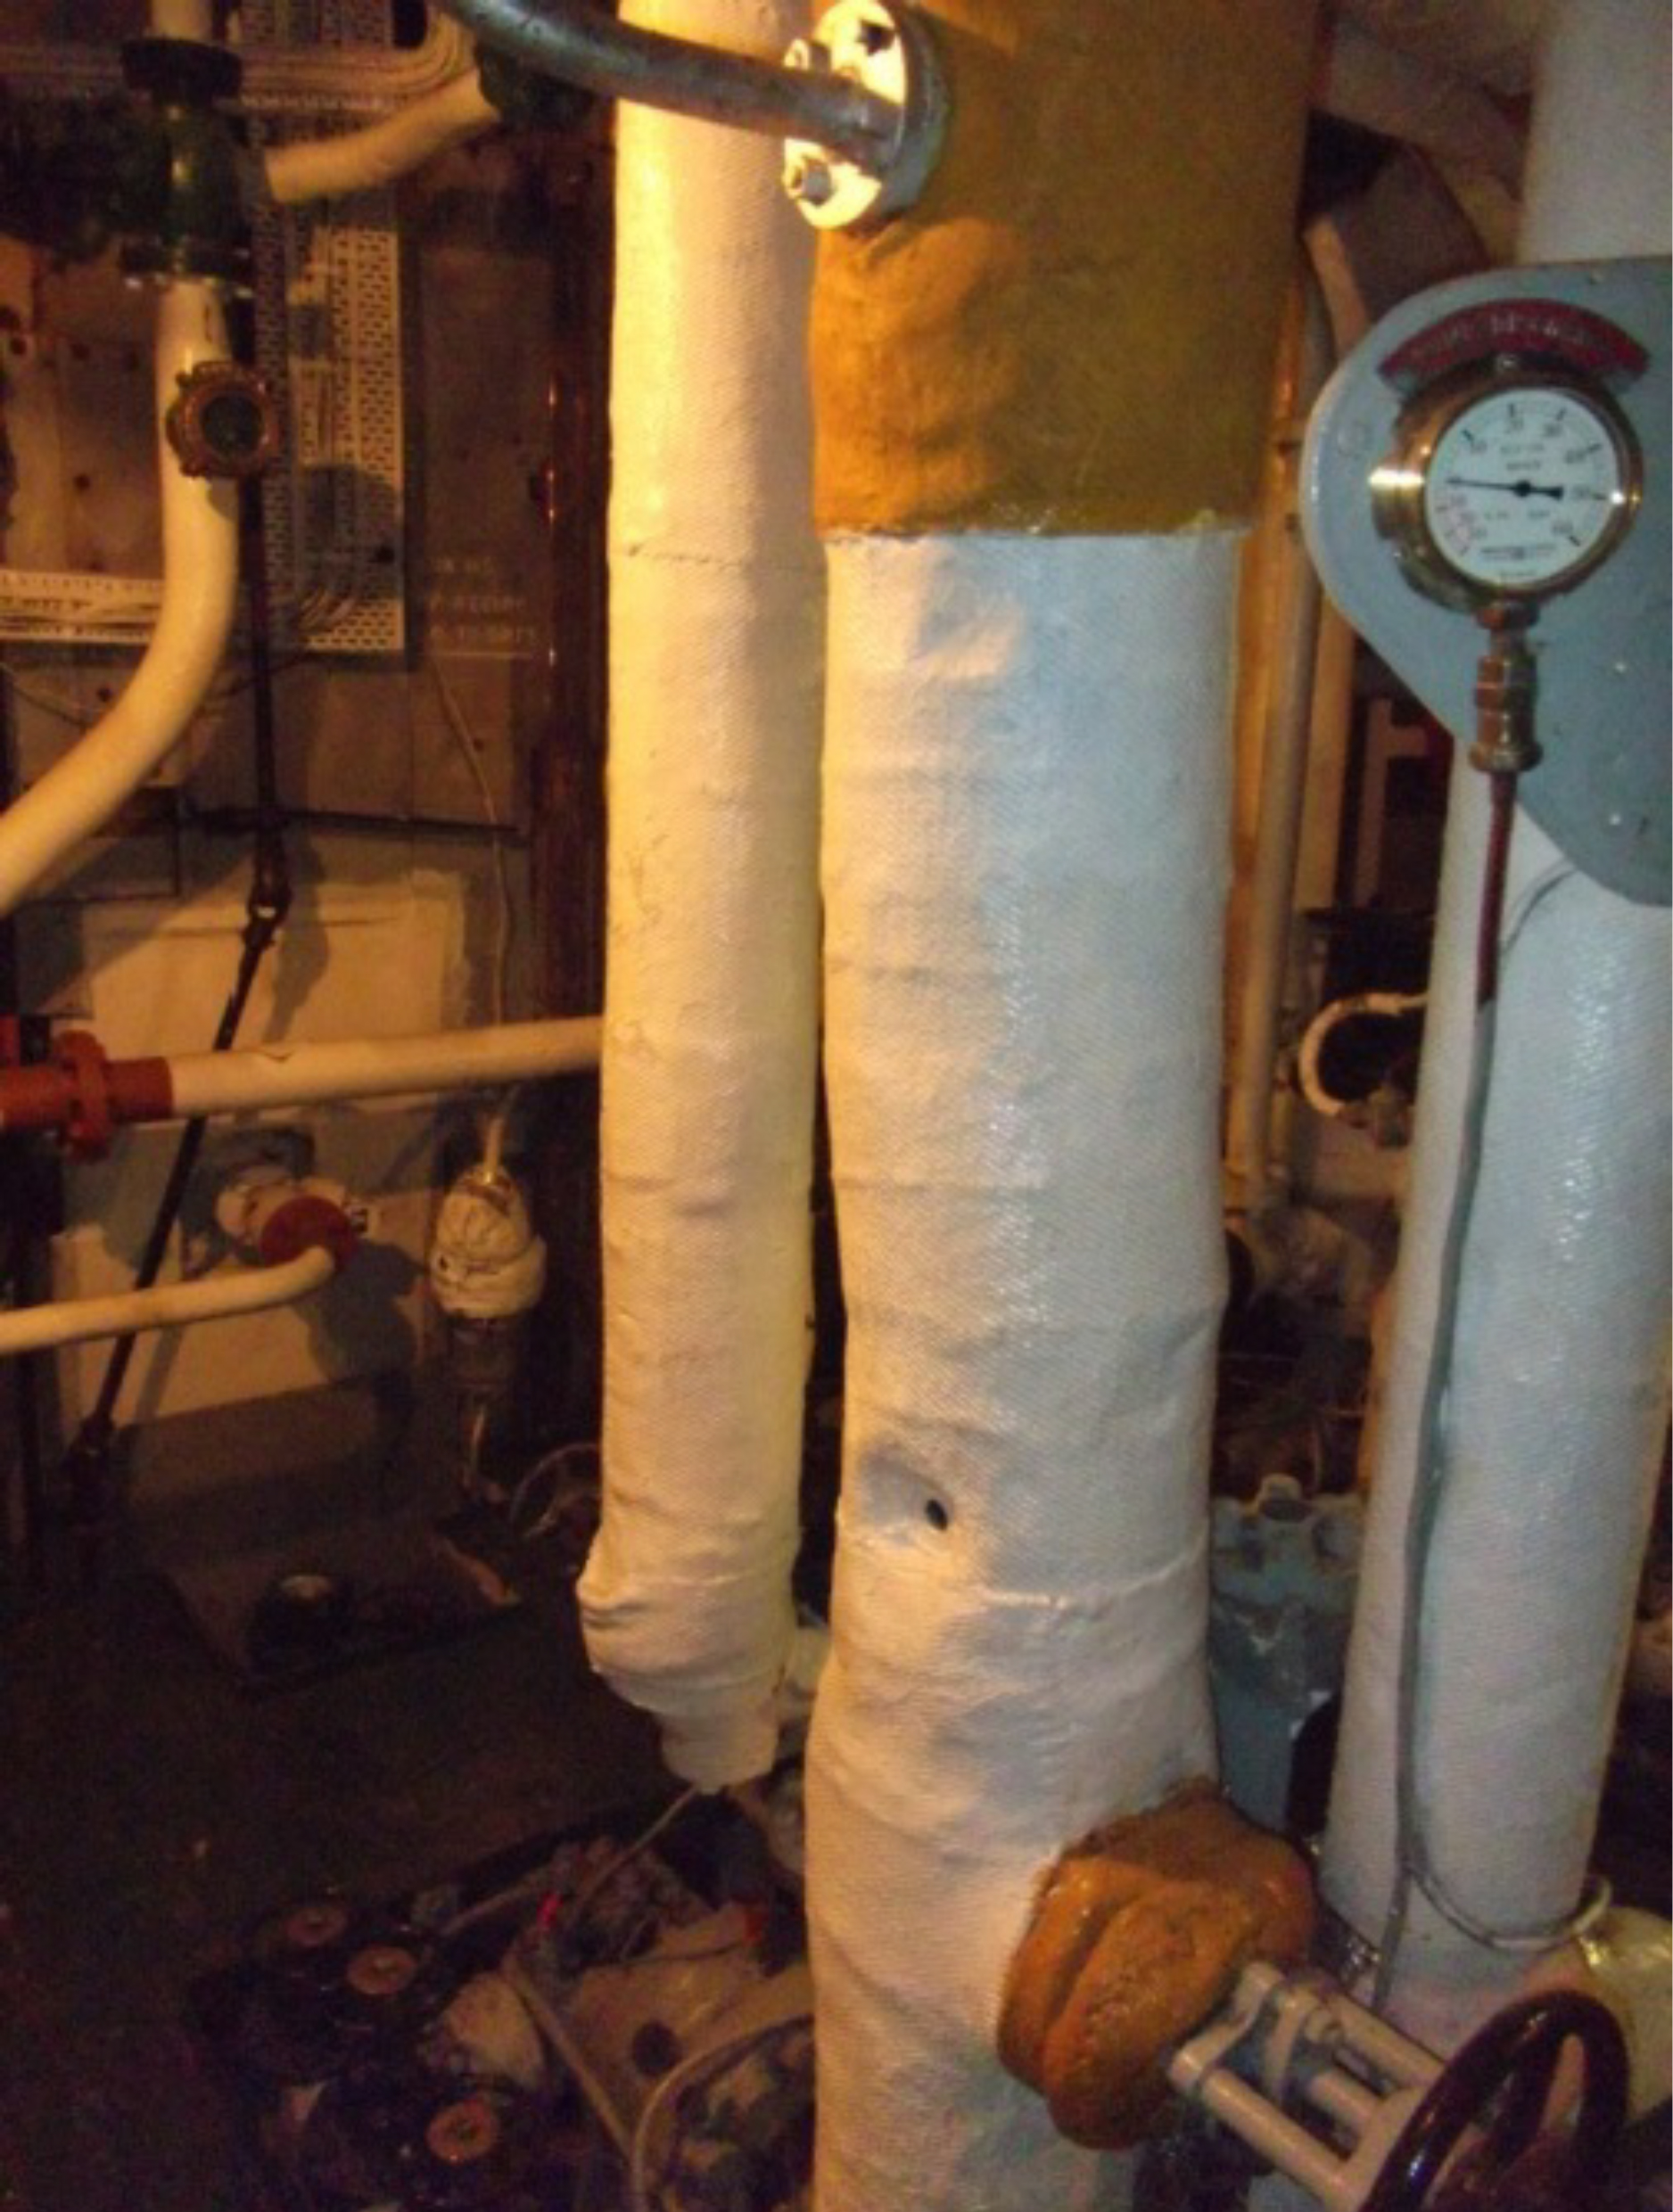 Lagged pipework containing asbestos